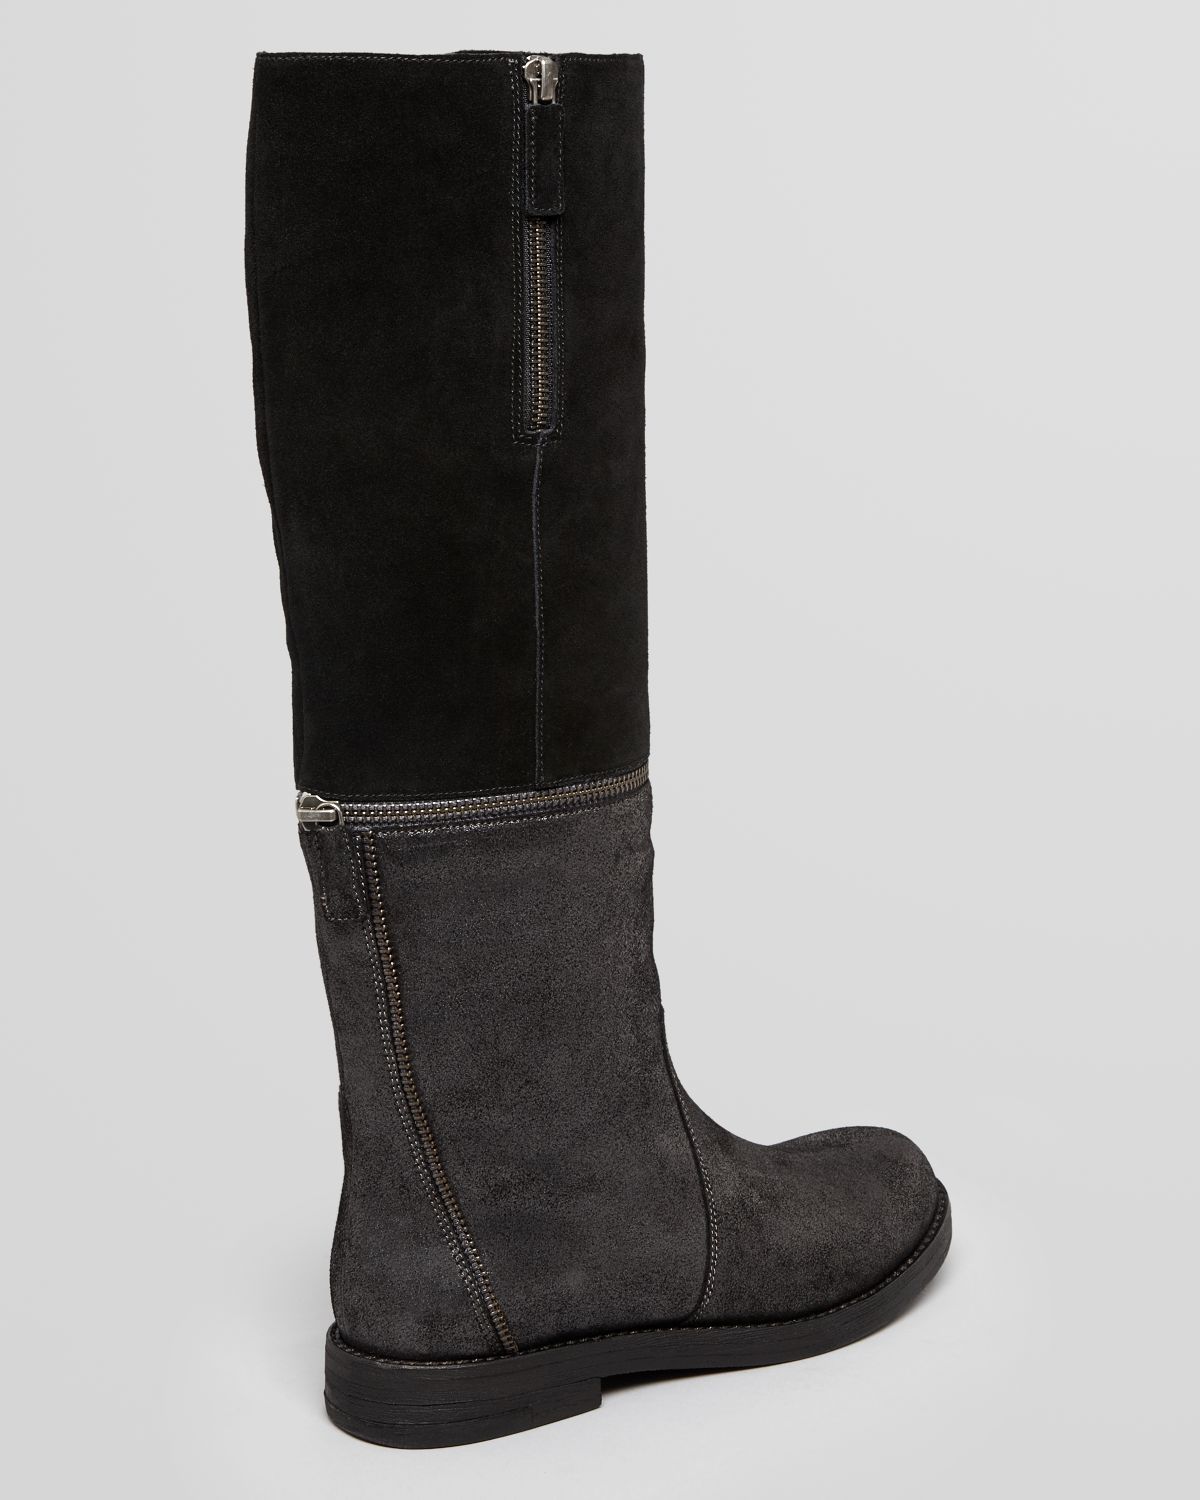 Lyst Eileen Fisher Boots Switch Convertible in Black